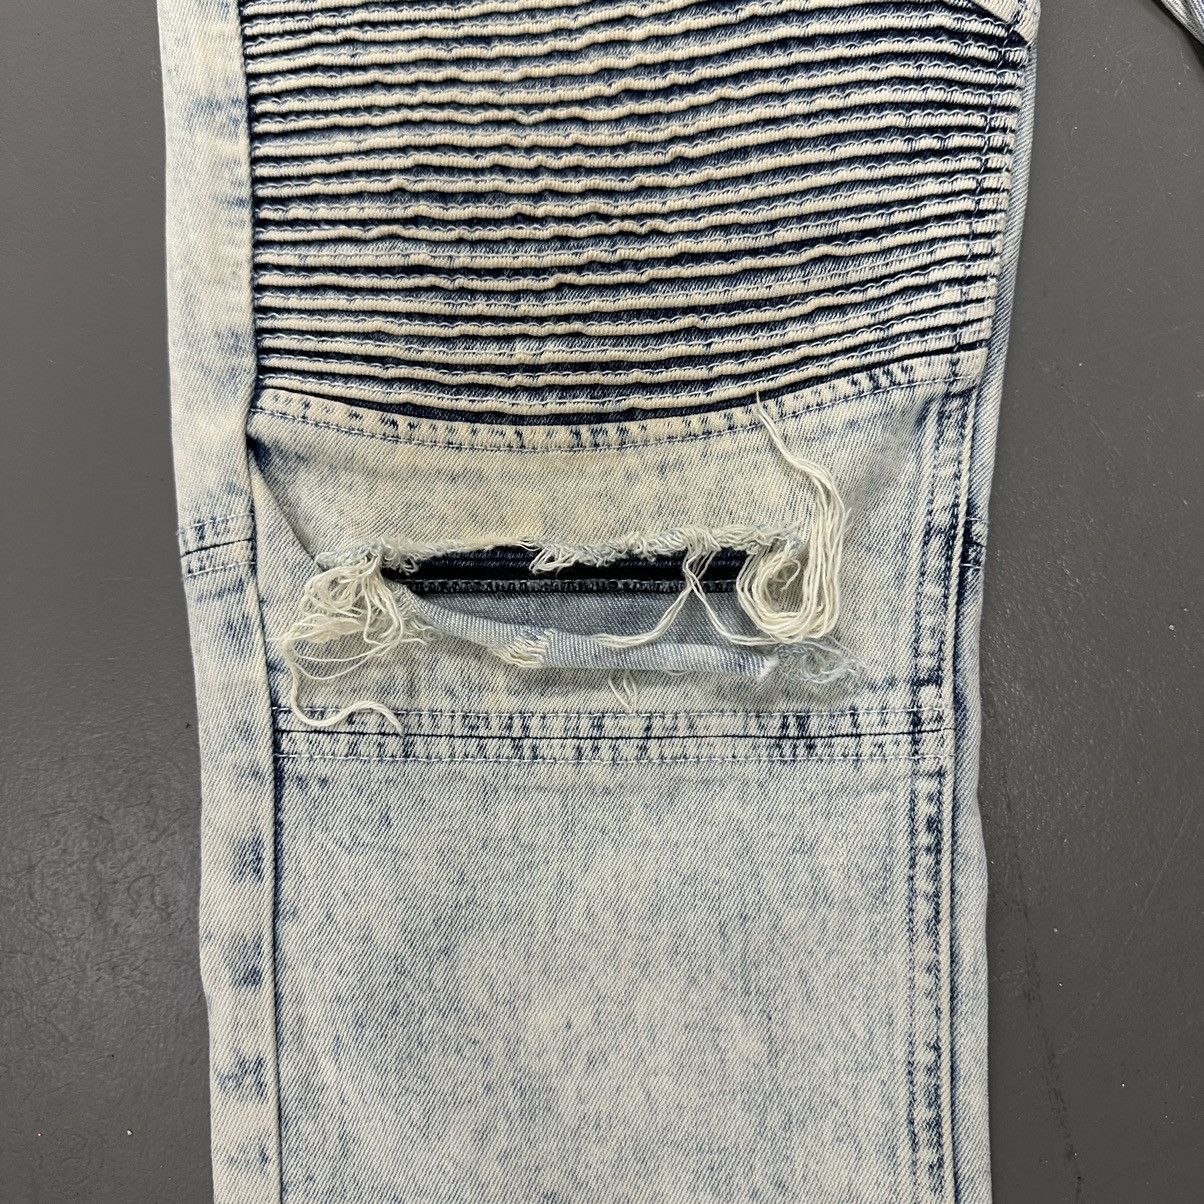 Pacsun Stacked Skinny Denim Jeans 34x32 - 5